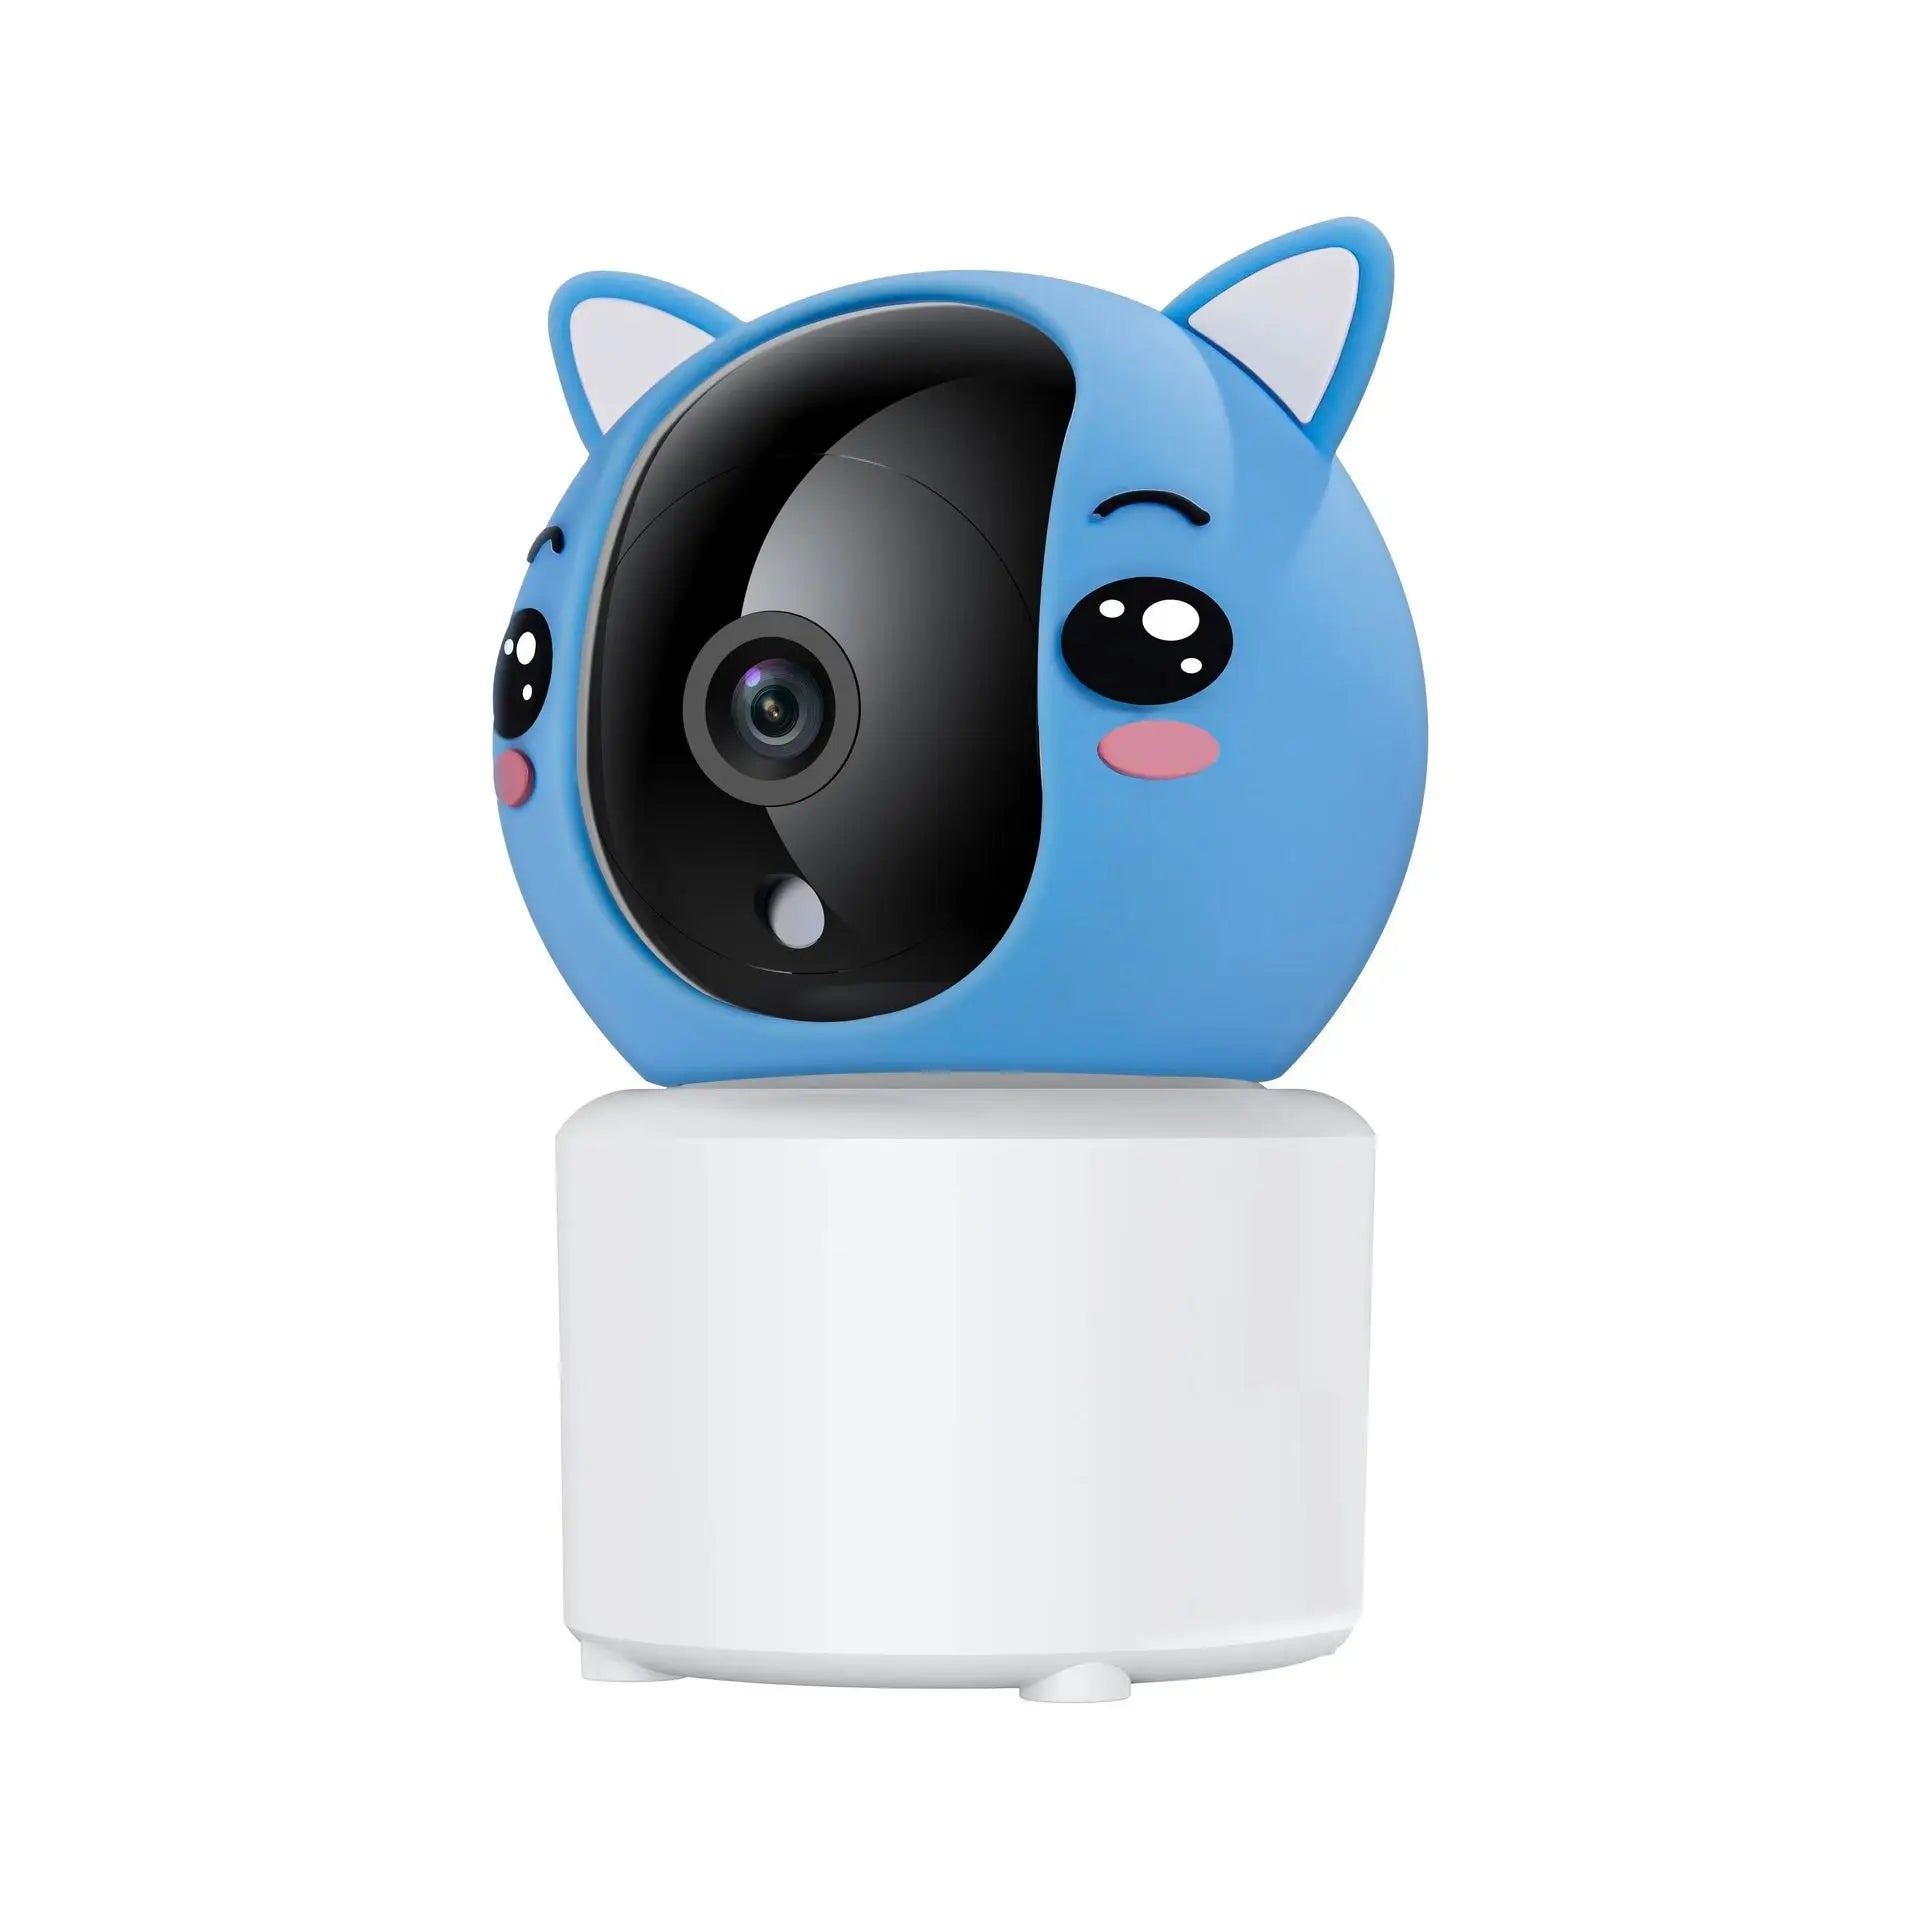 Auto Tracking  Home Security CCTV Baby Monitor